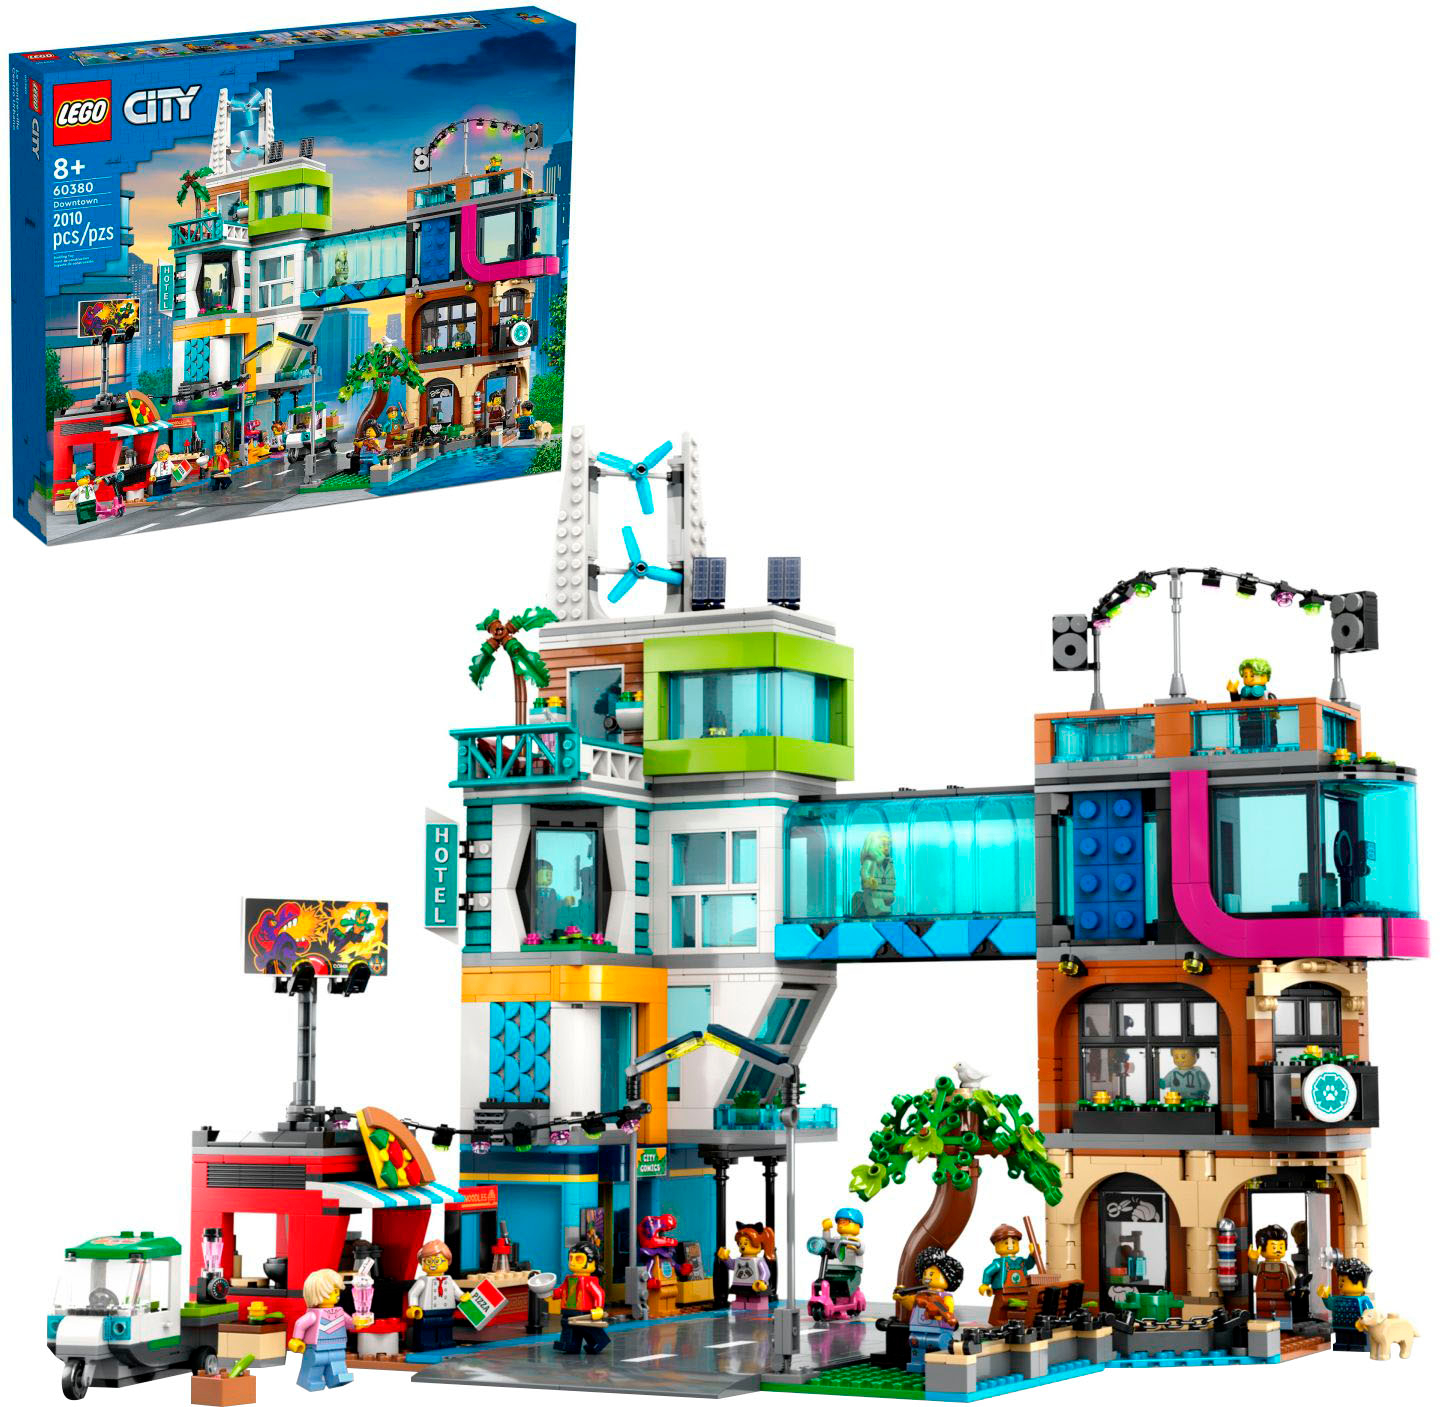 Four new LEGO Friends sets perfect for a LEGO city layout – Blocks